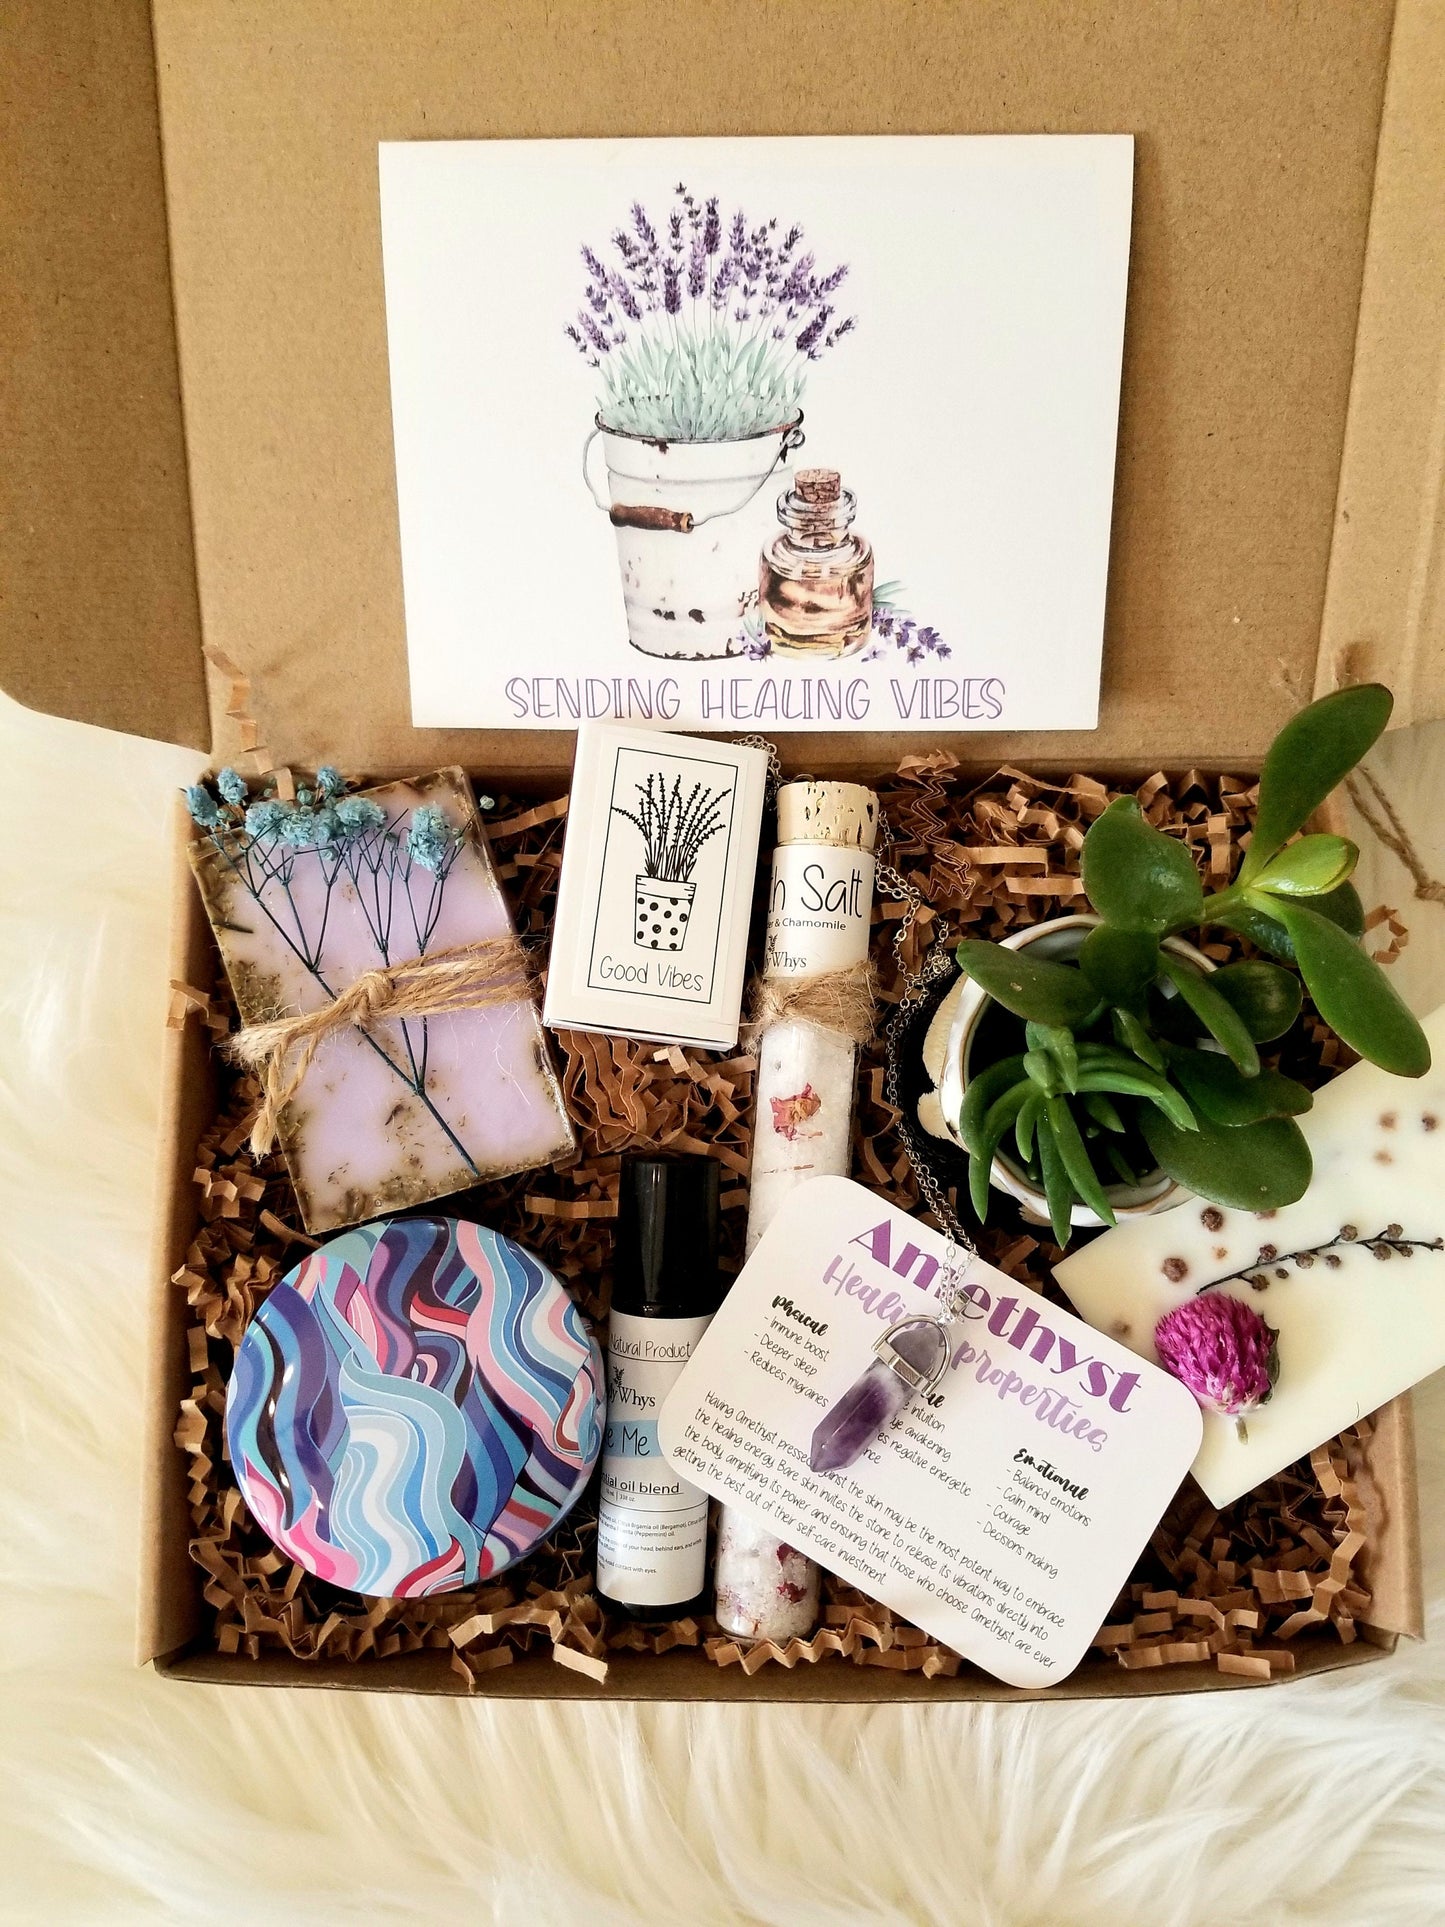 Sending healing vibes gift basket, Thinking of you care package, spirituality gift box, send a healing vibes package, amethyst necklace.